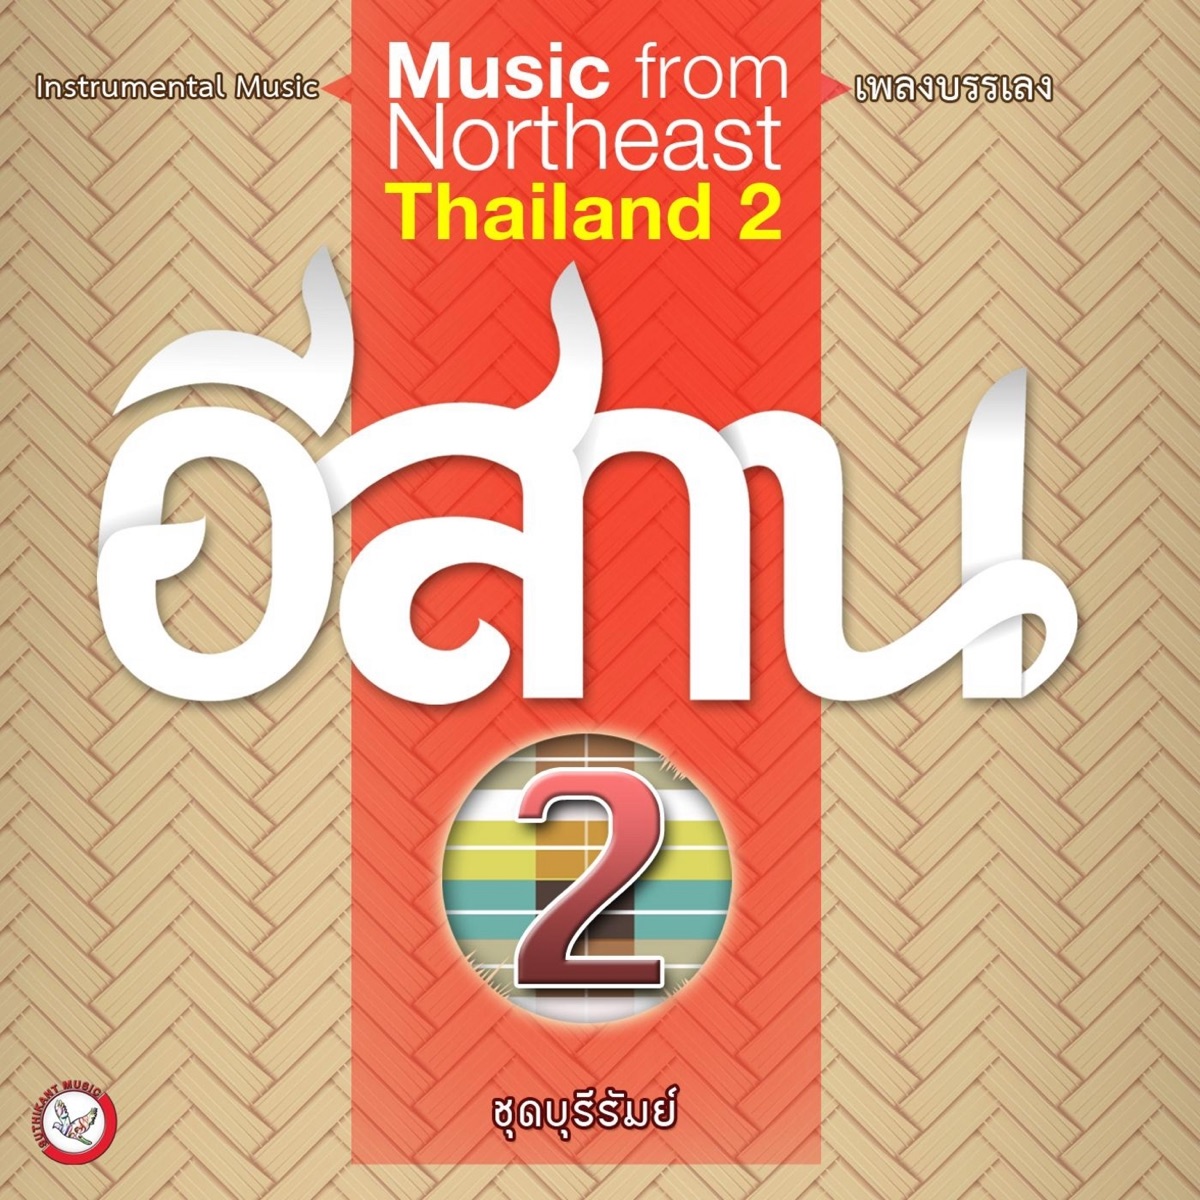 Music from Central Thailand (Vocal-Thai) by Suthikant Music on Apple Music